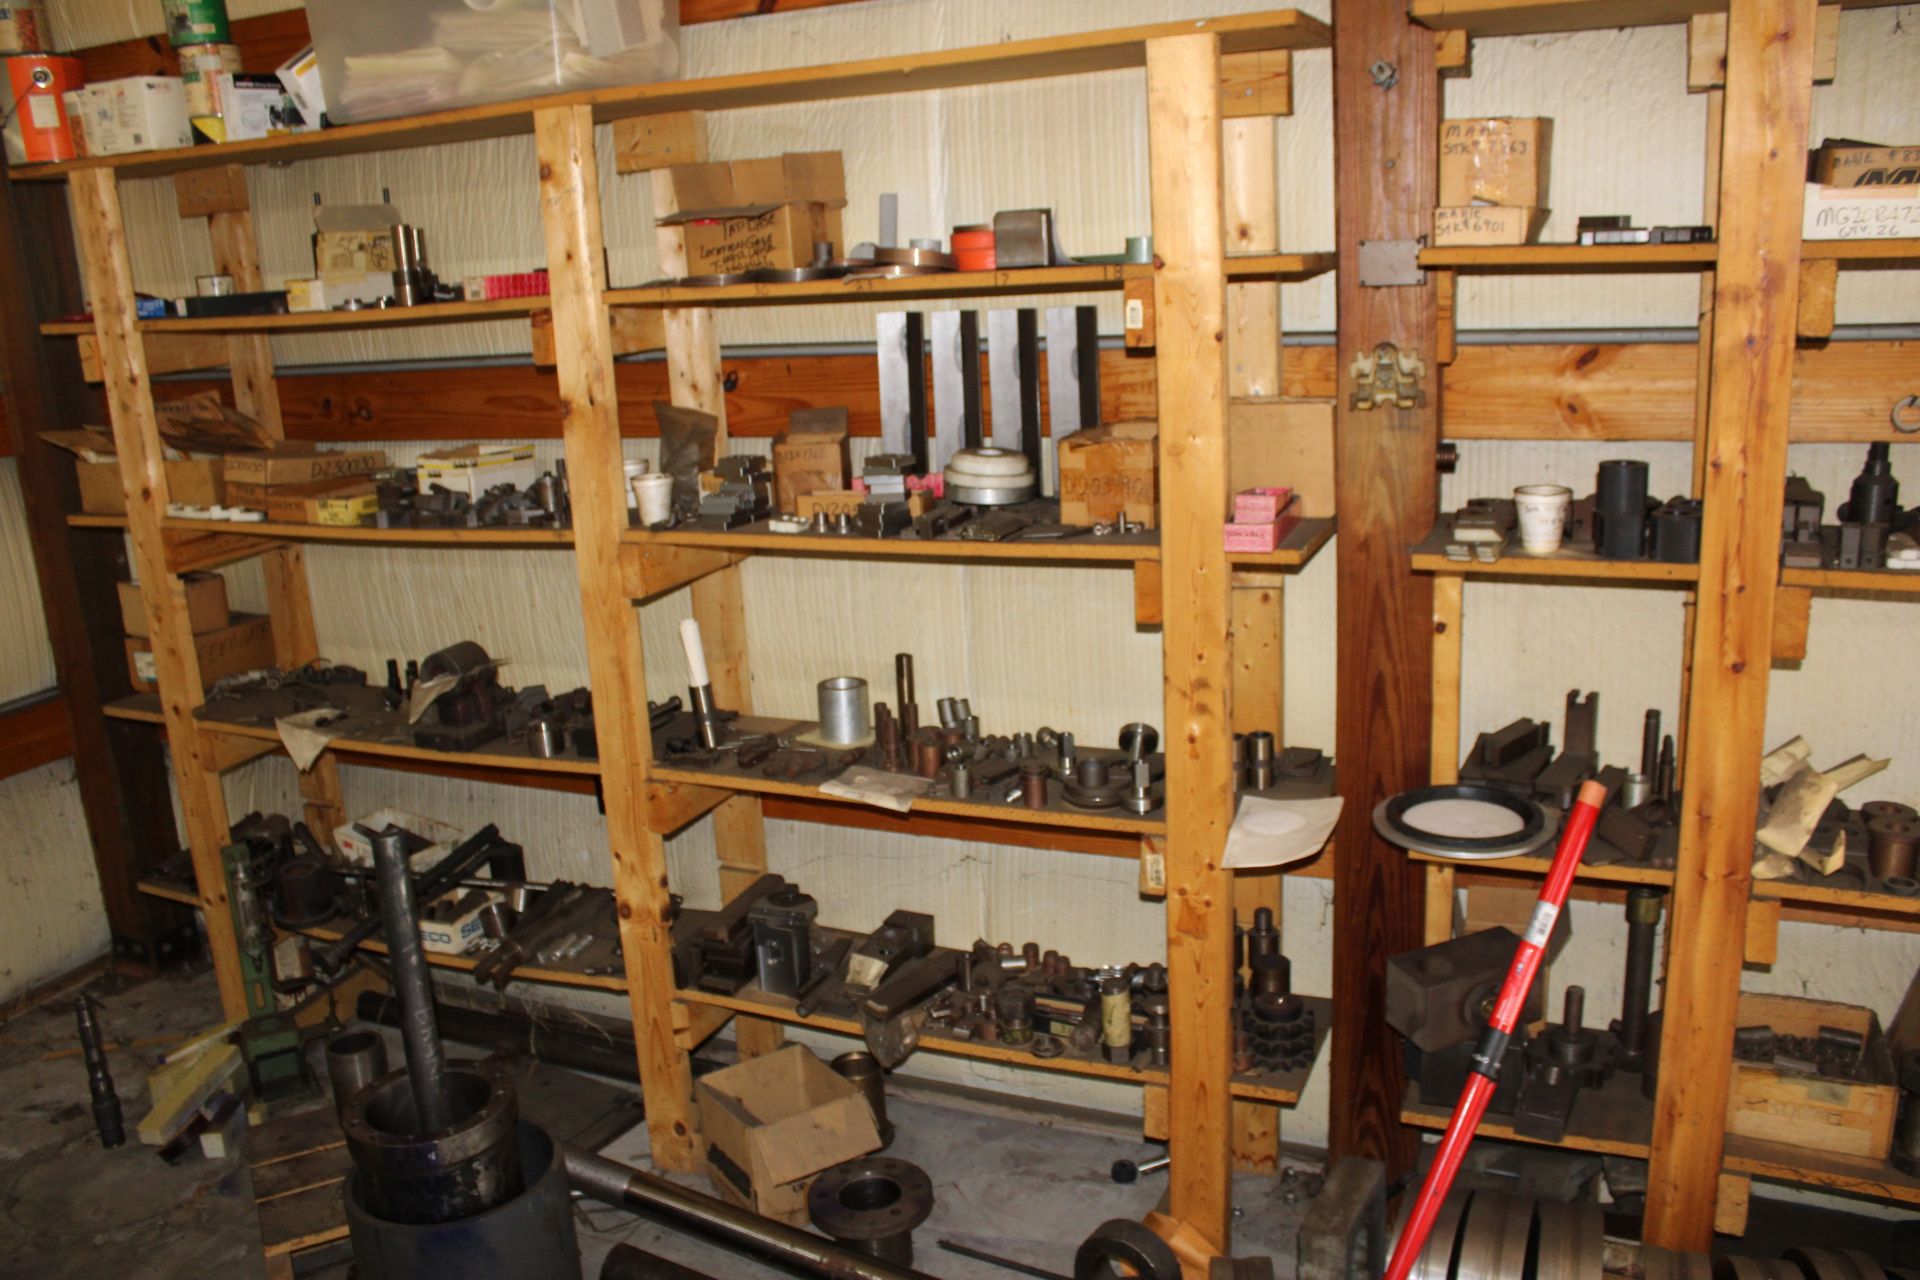 Contents of Shelves: Various Holders, Fixtures, Metal Parts & Pieces - Image 2 of 3